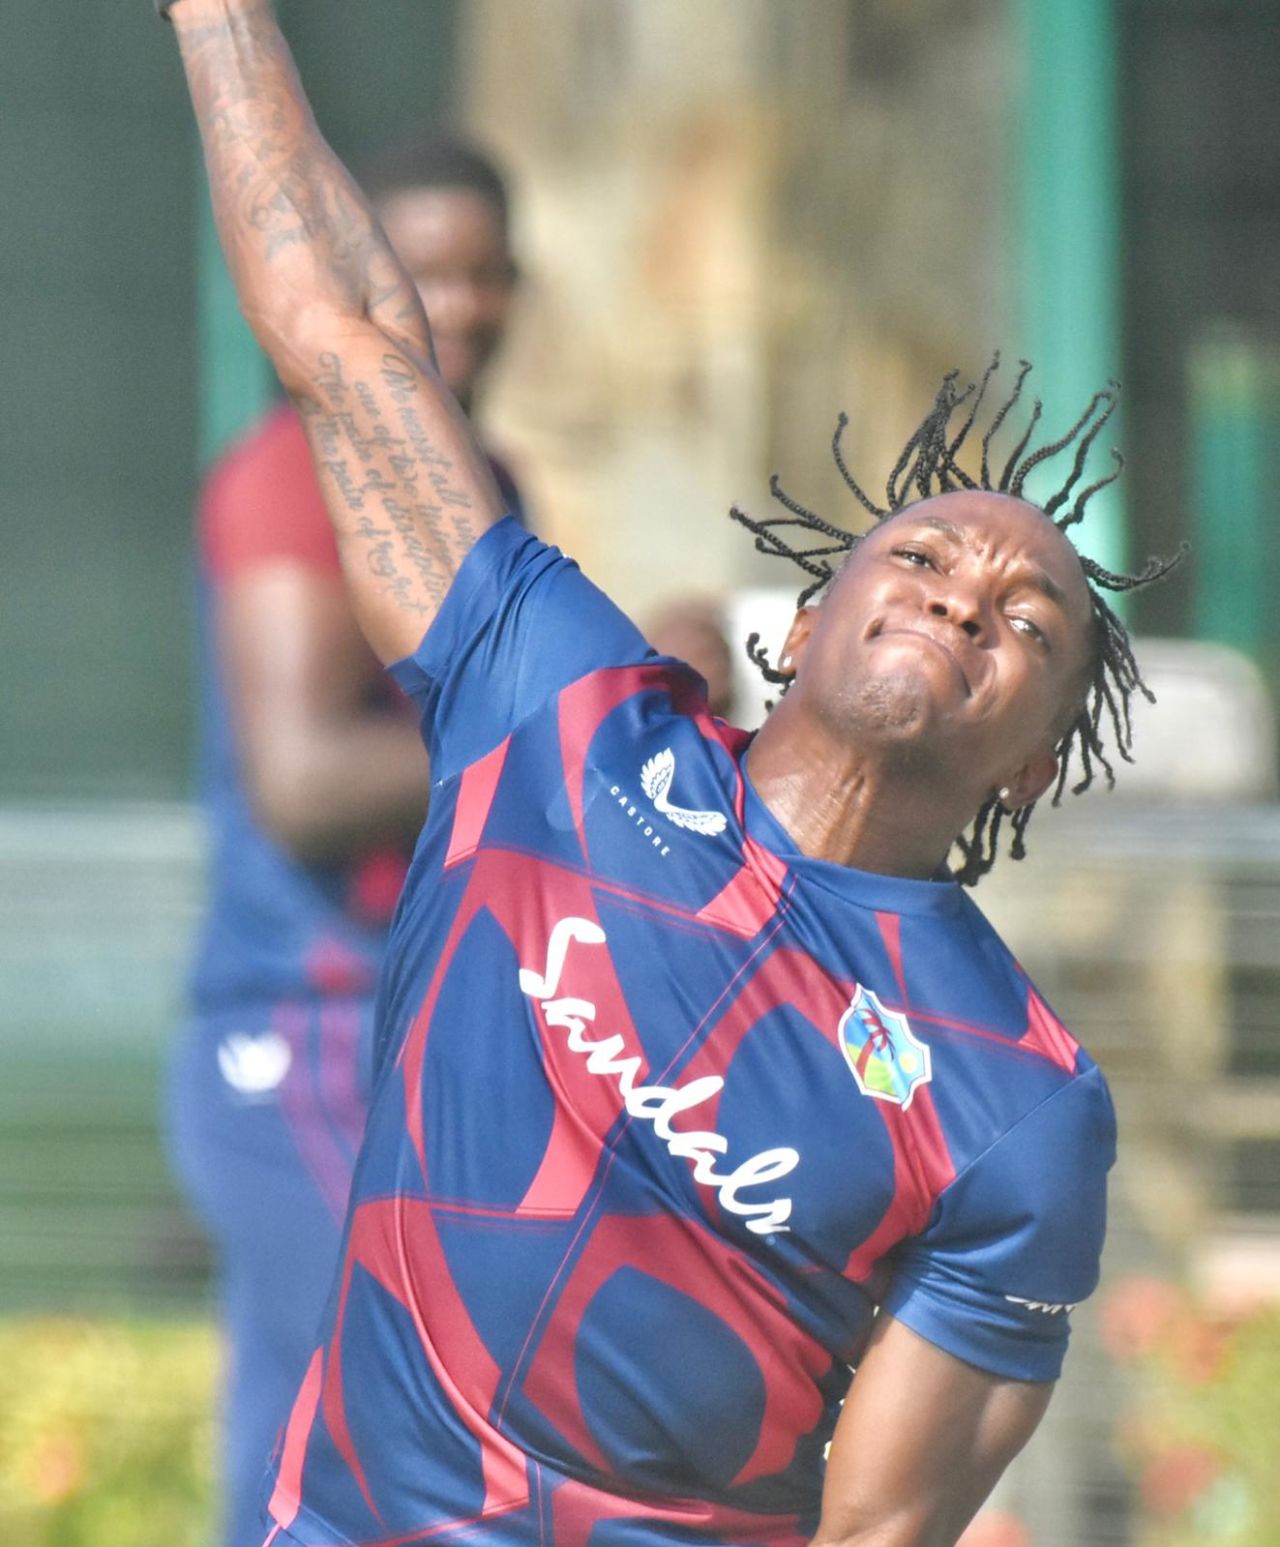 Fidel Edwards turns his arm over in training, Antigua, March 2, 2021